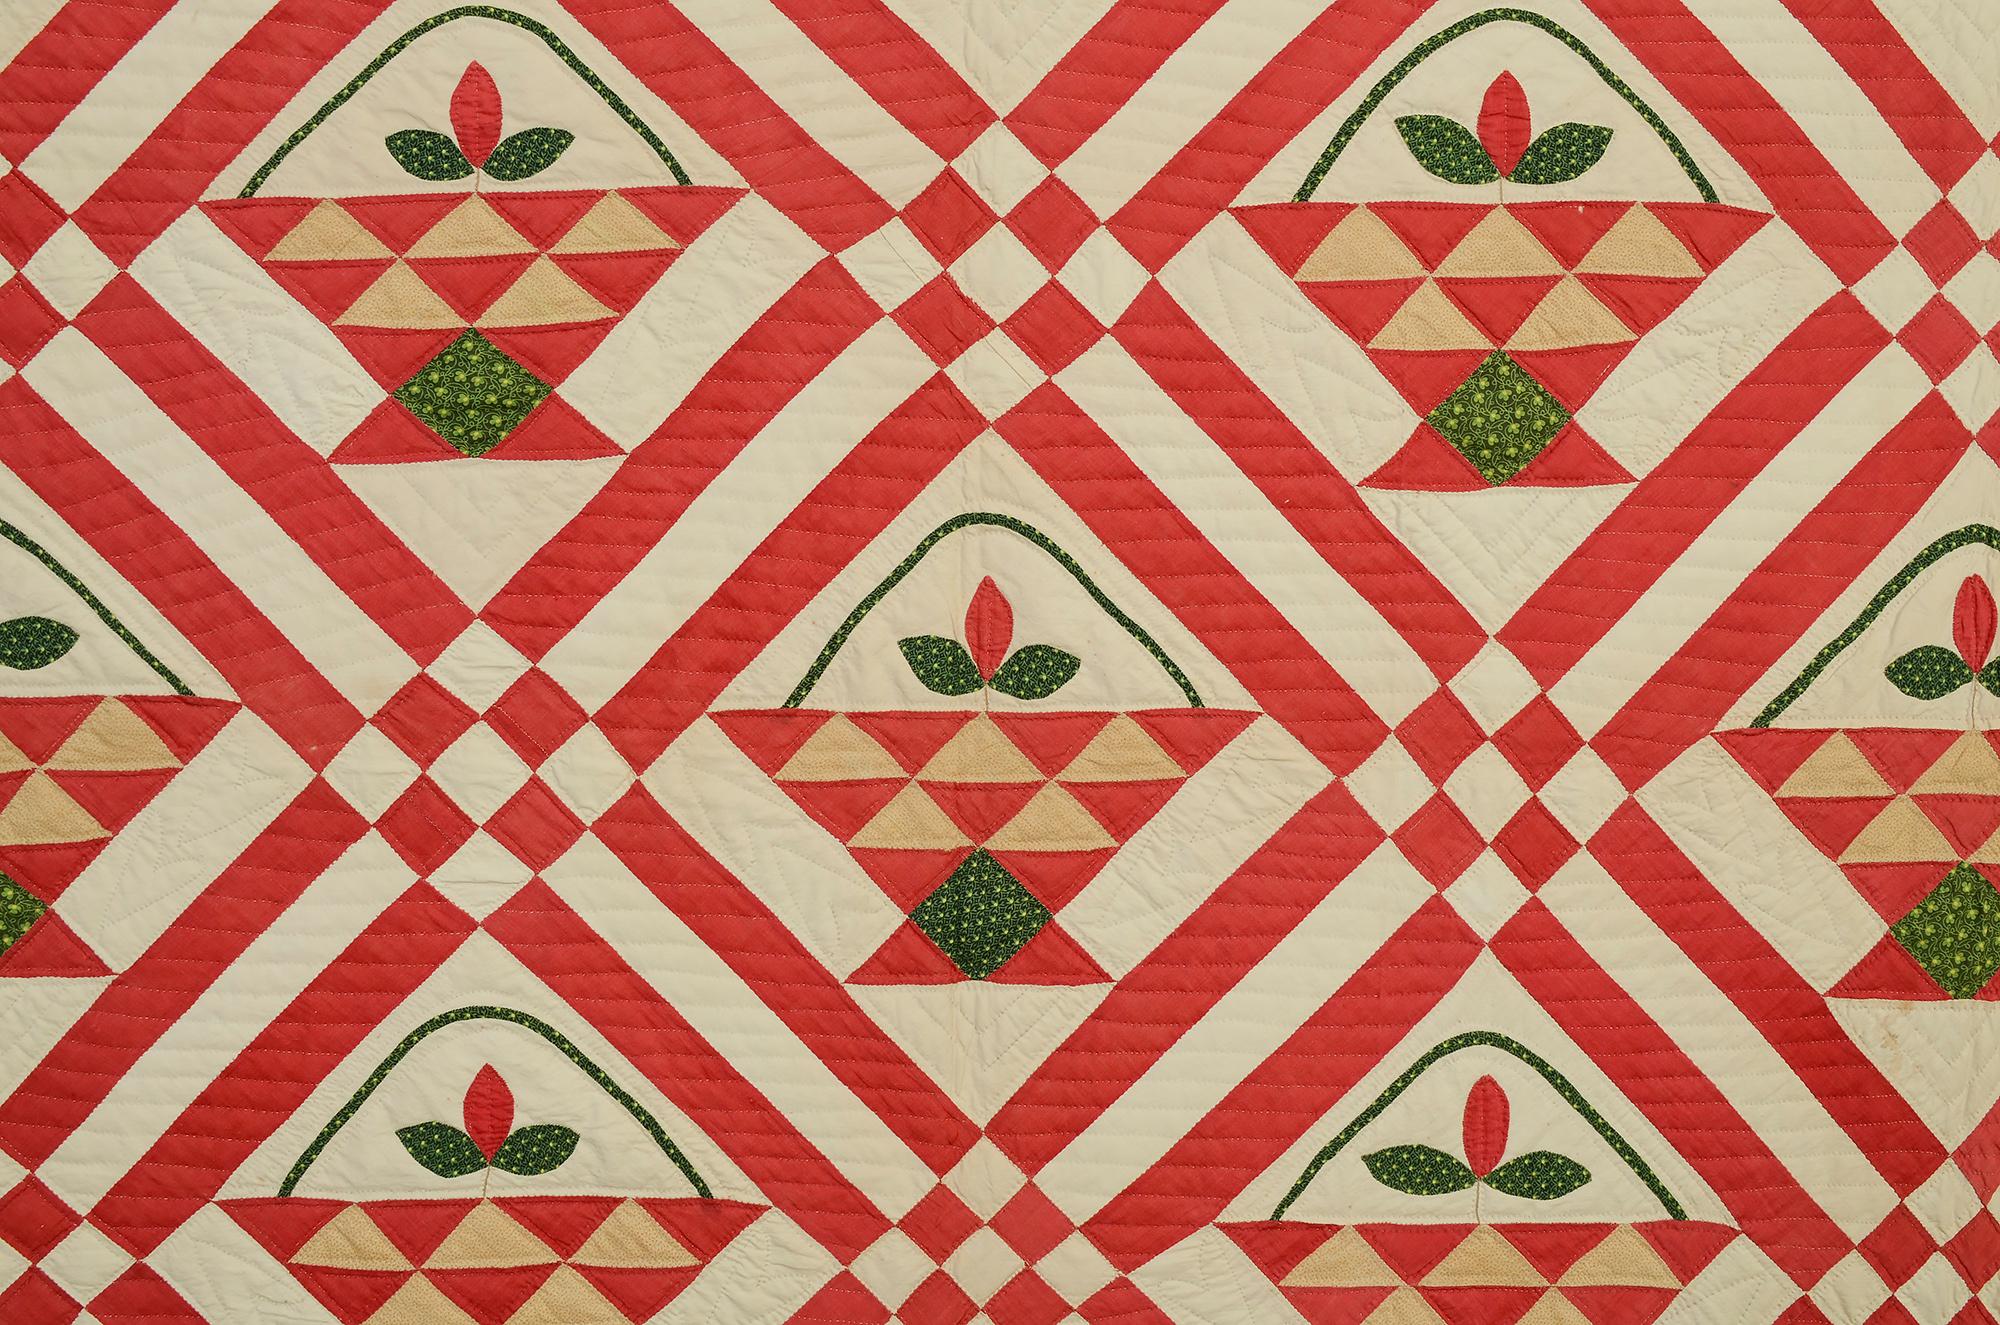 American Baskets Quilt with Appliqued Flowers